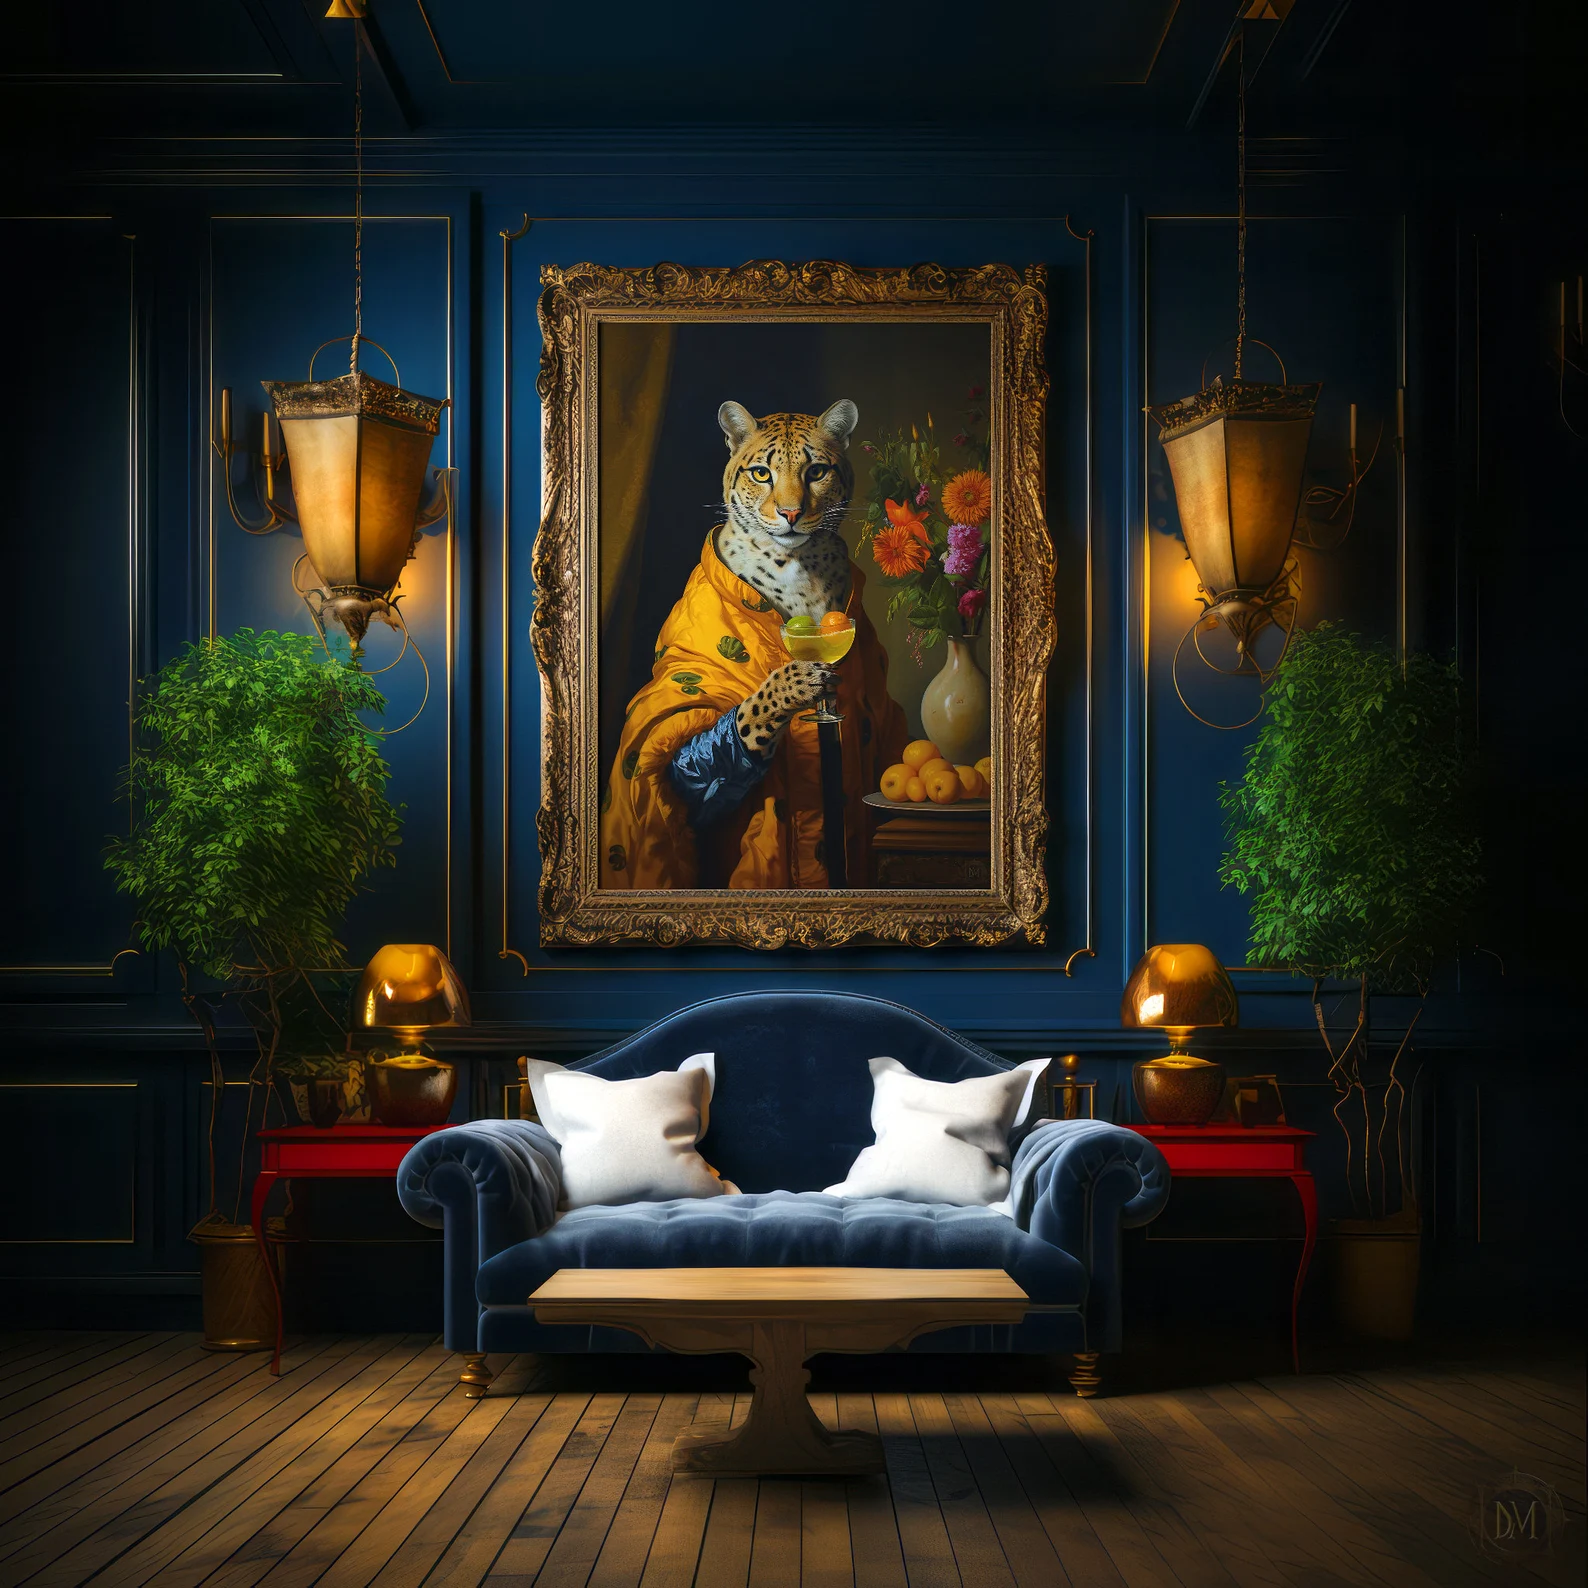 Dark Academia Wall Art Printable Animal Painting of Medieval Gothic Renaissance Coco Chanel Fashion Leopard Hanging on a Blue Wall over a Blue Romanticism Couch with Plants and Lamps